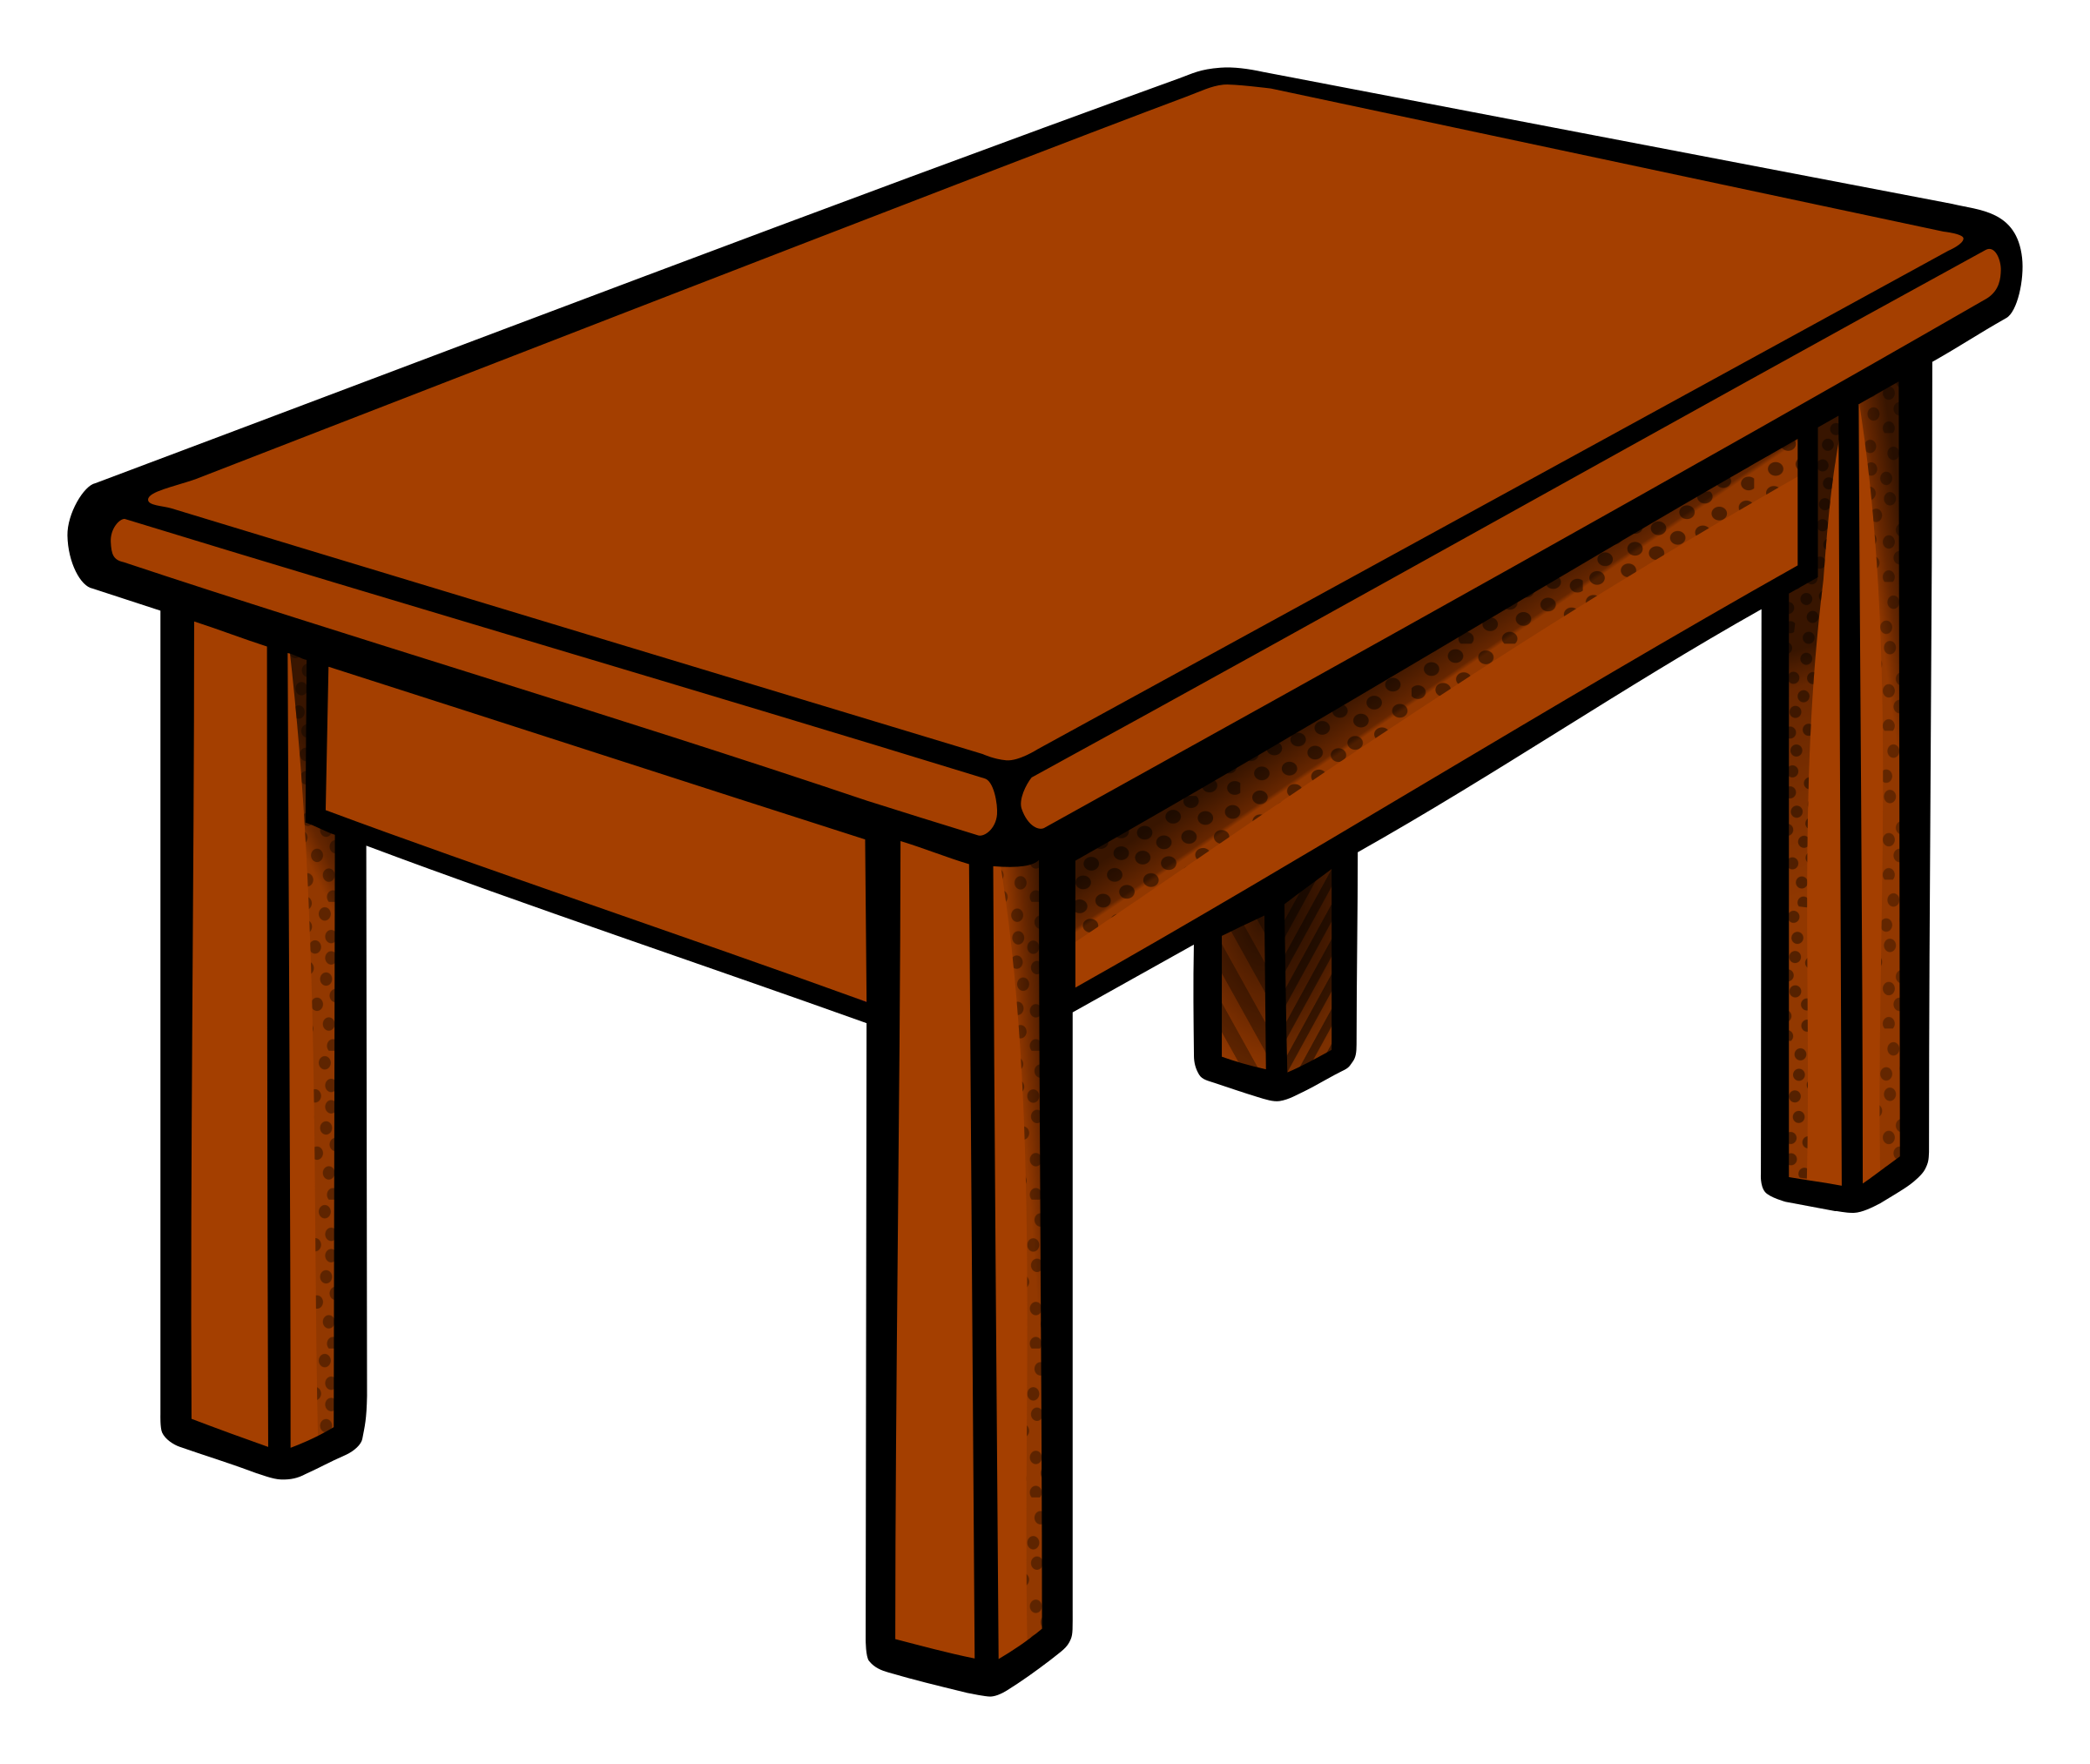 Clip art tables and art on